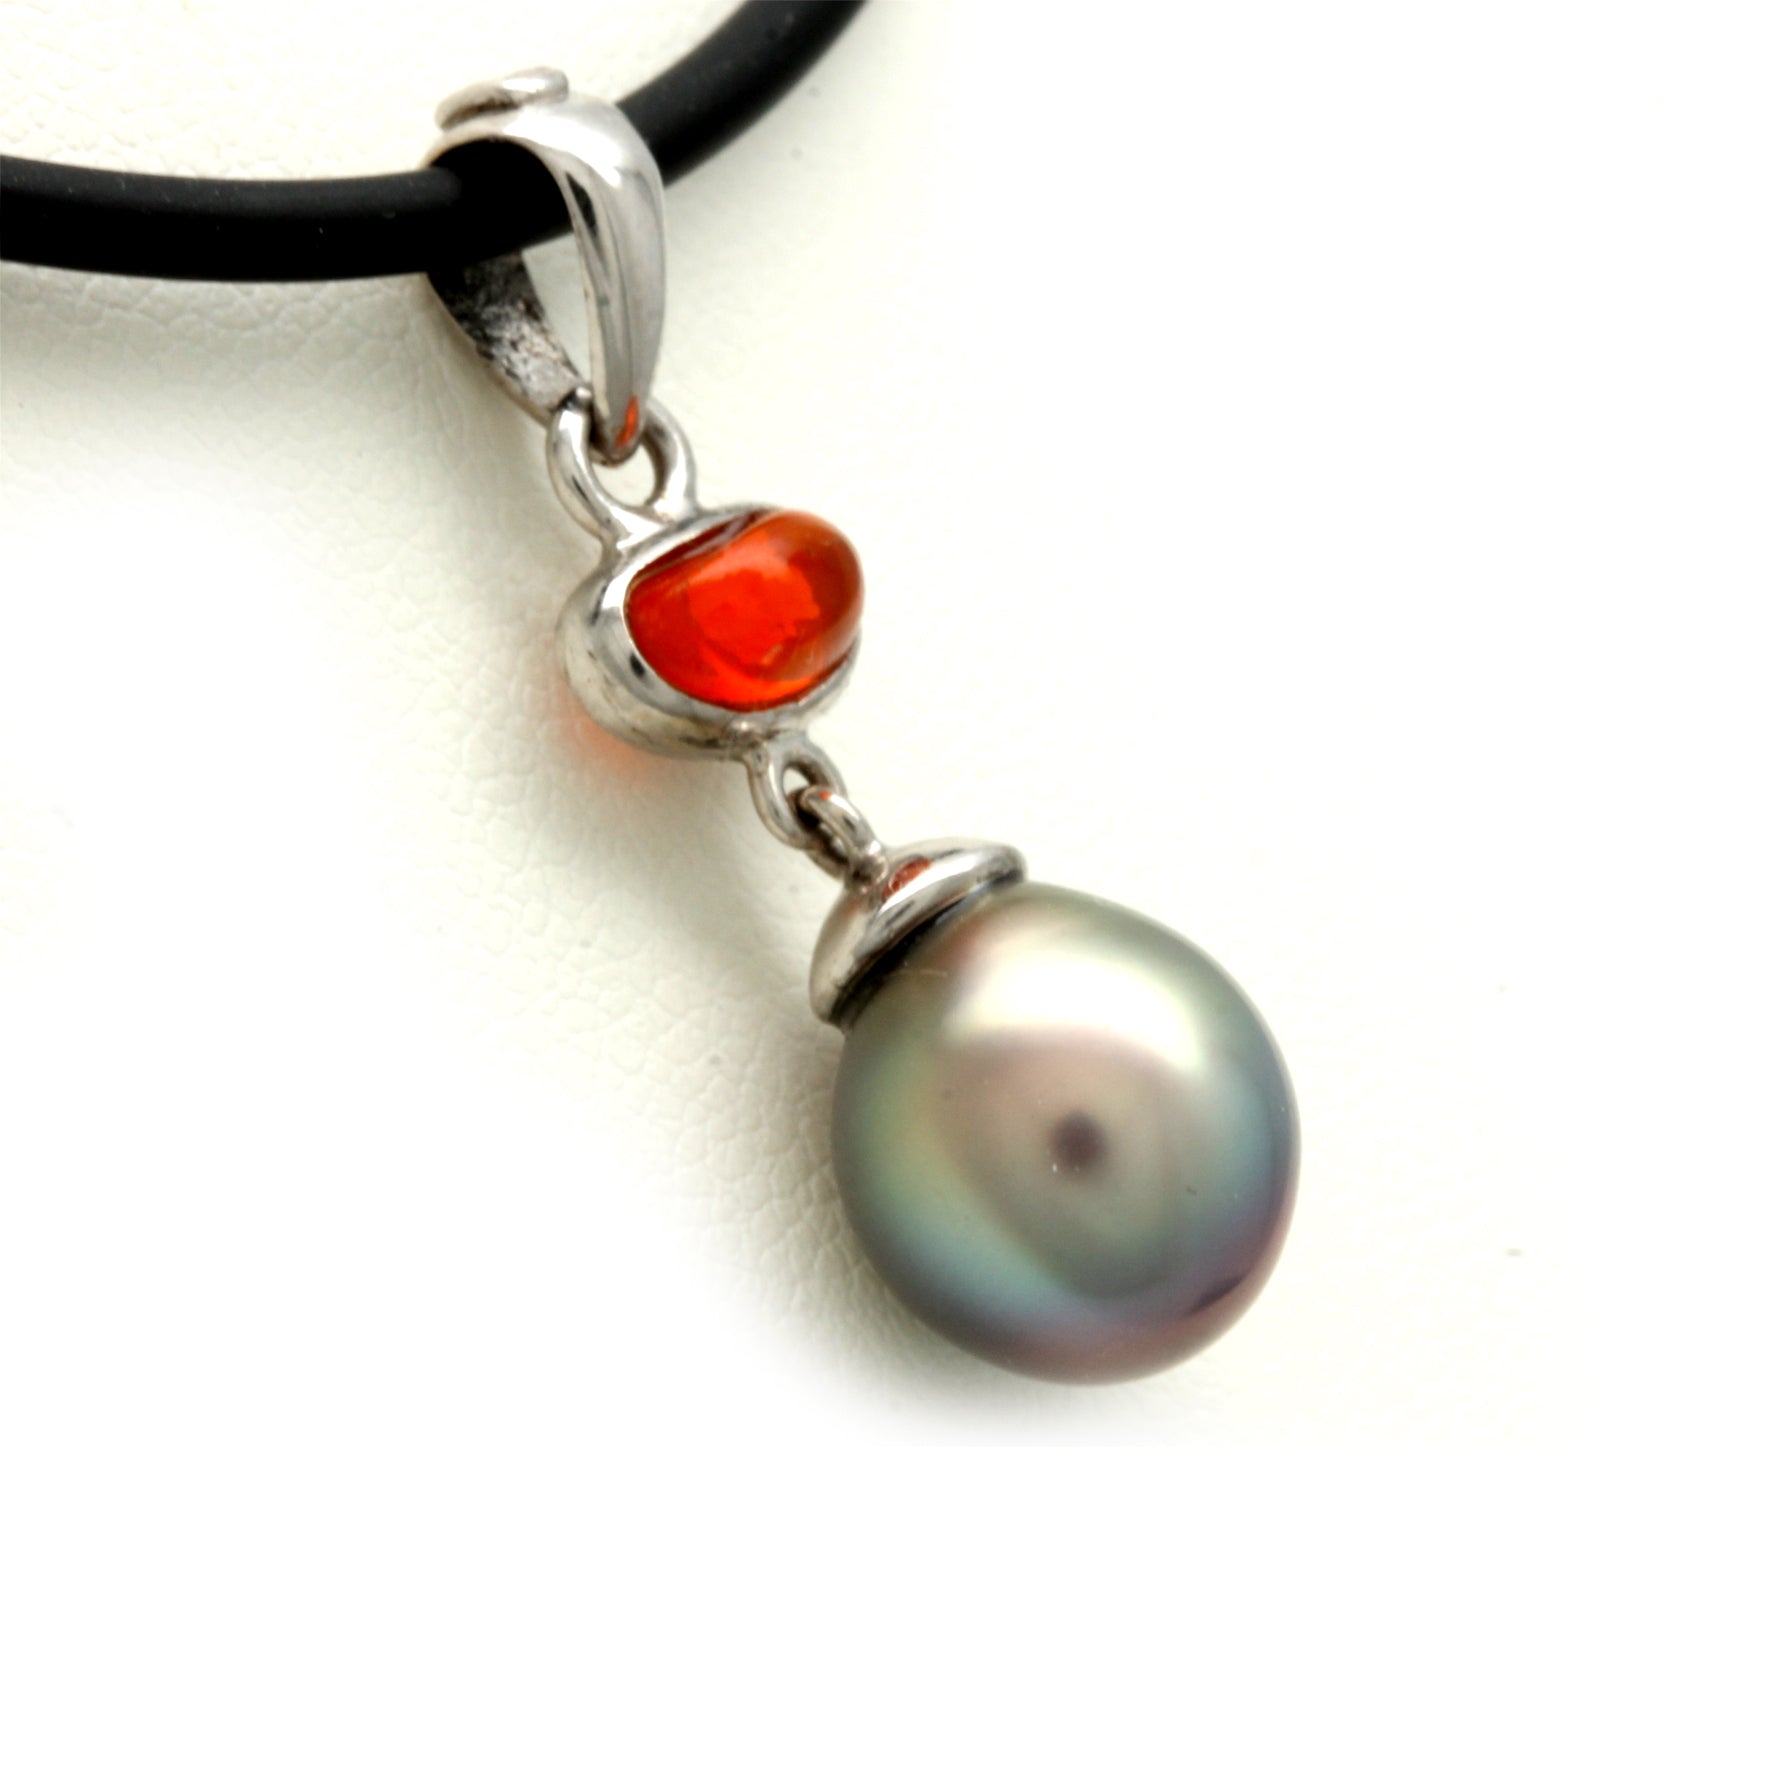 Blue/Green Cortez Pearl and Orange Fire Opal set on 14K White Gold Pendant